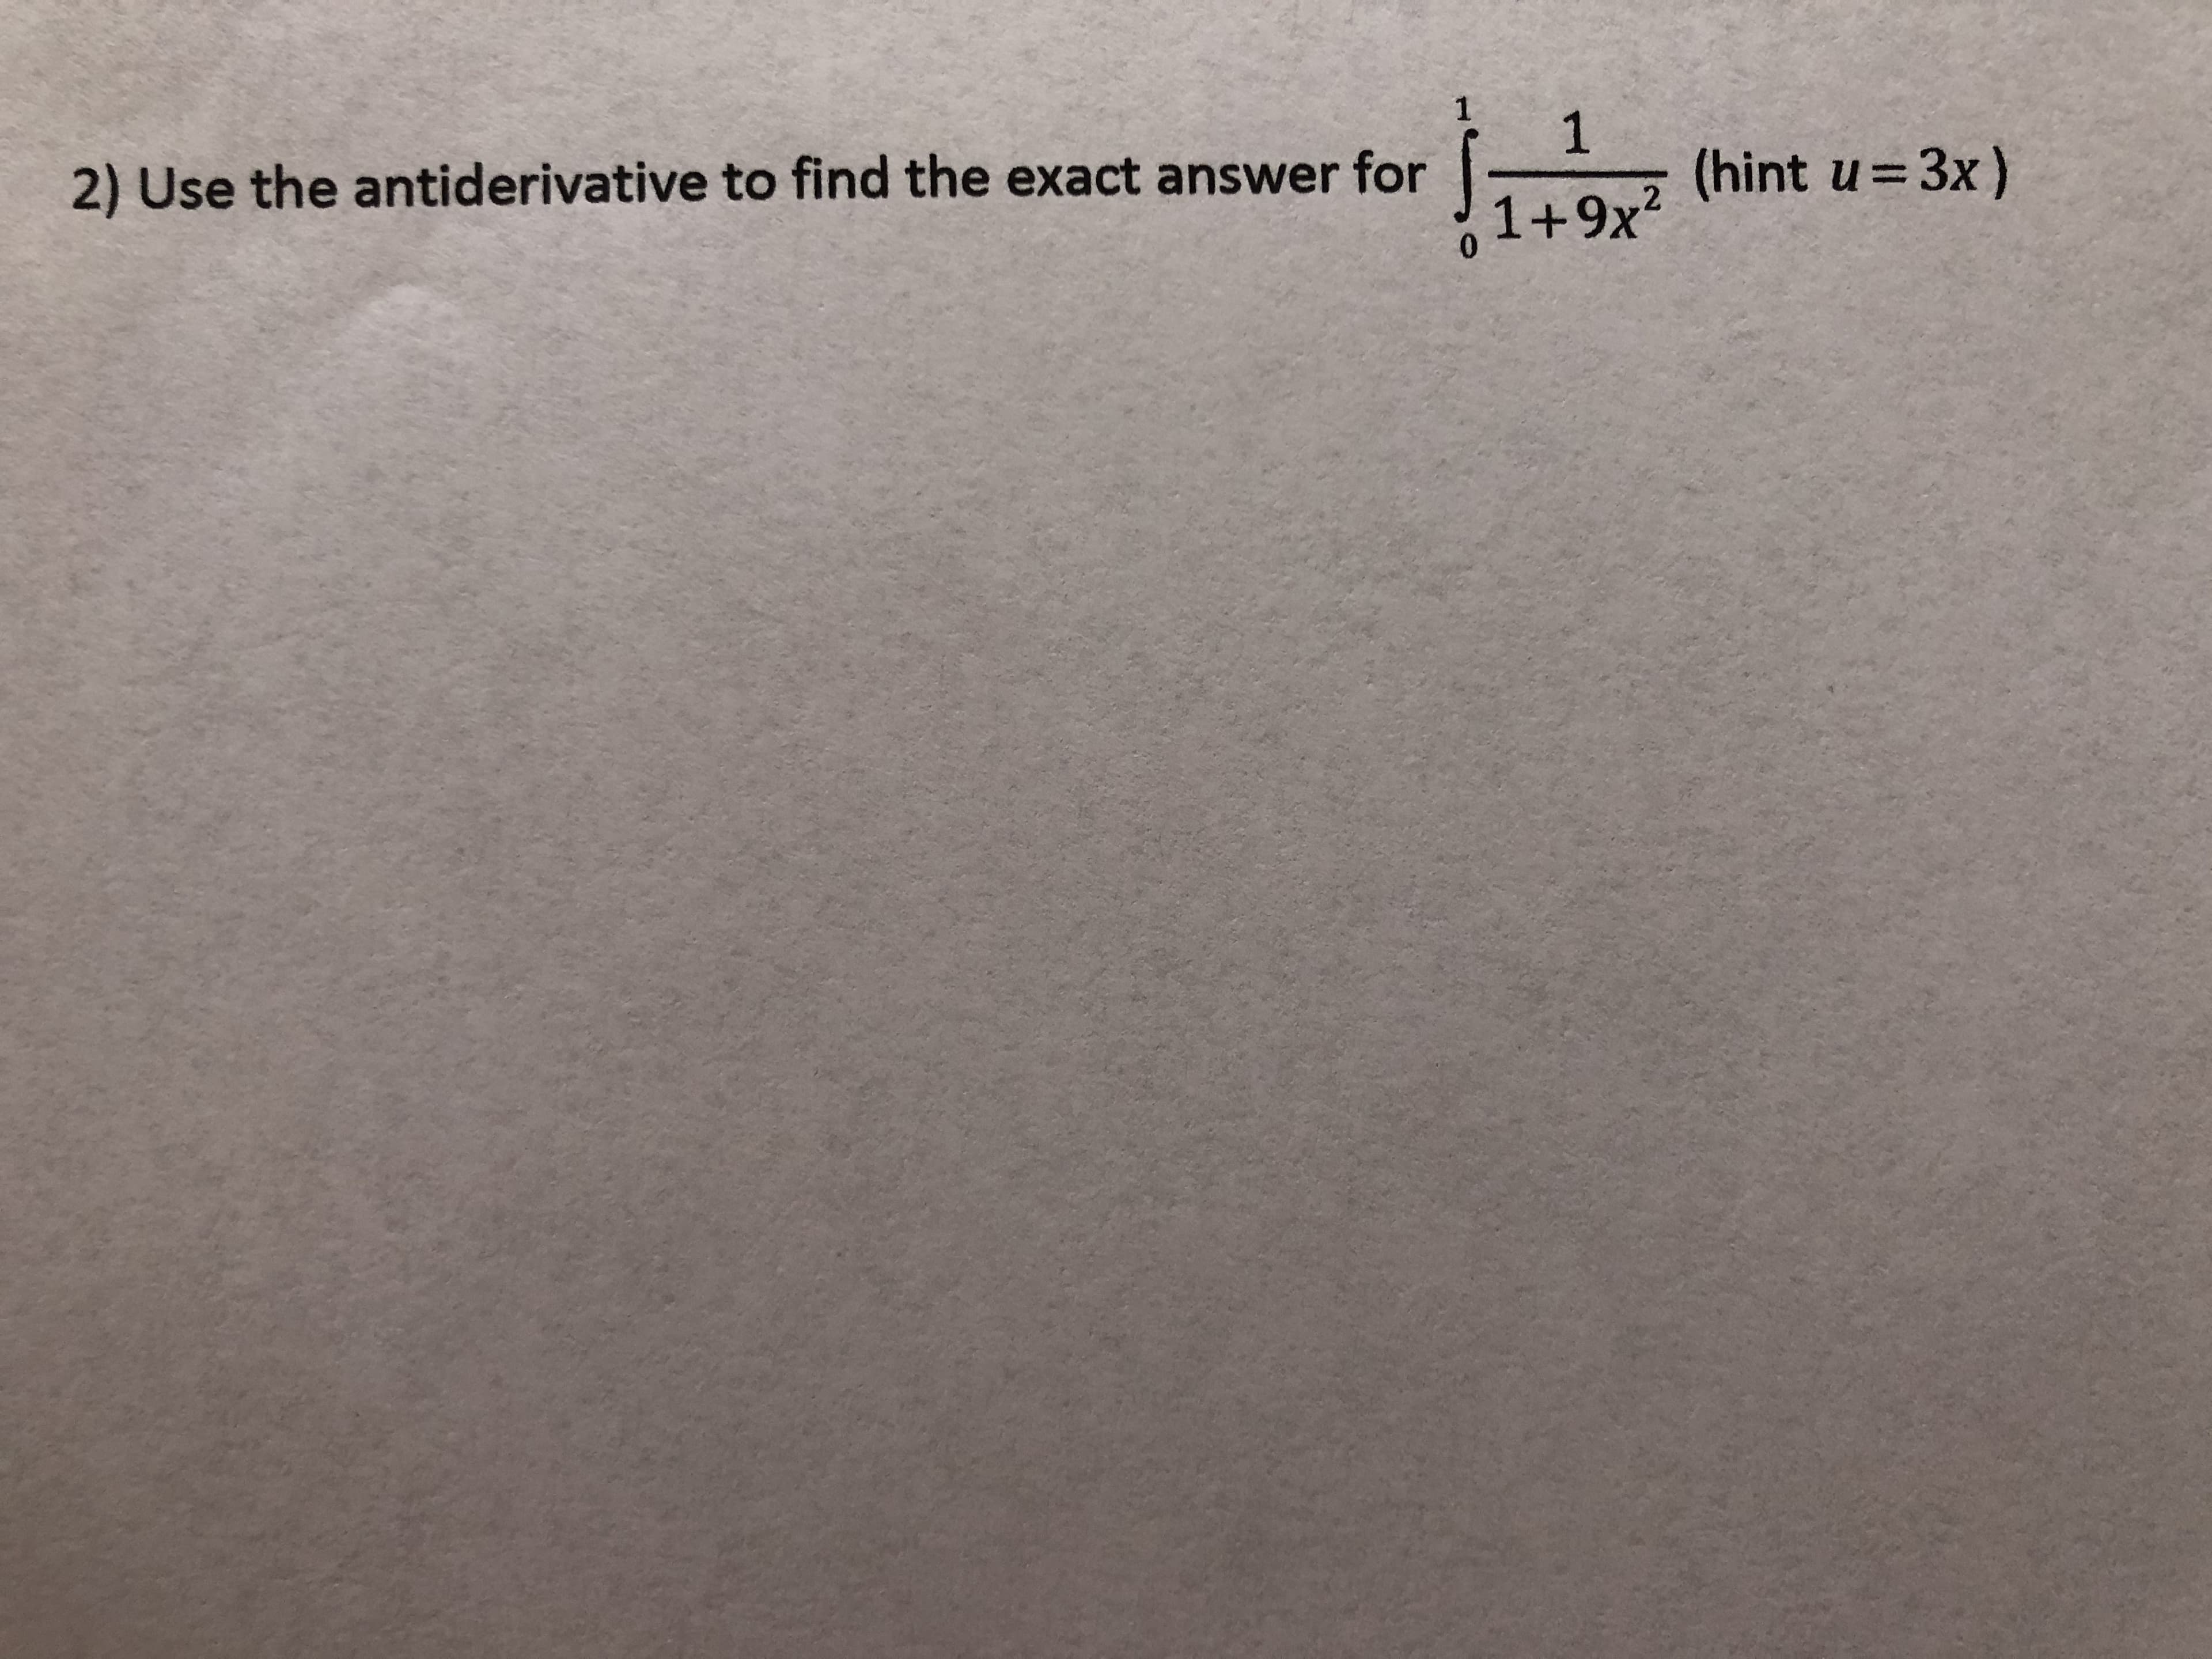 2) Use the antiderivative to find the exact answer for
(hint u=3x)
1+9x²
